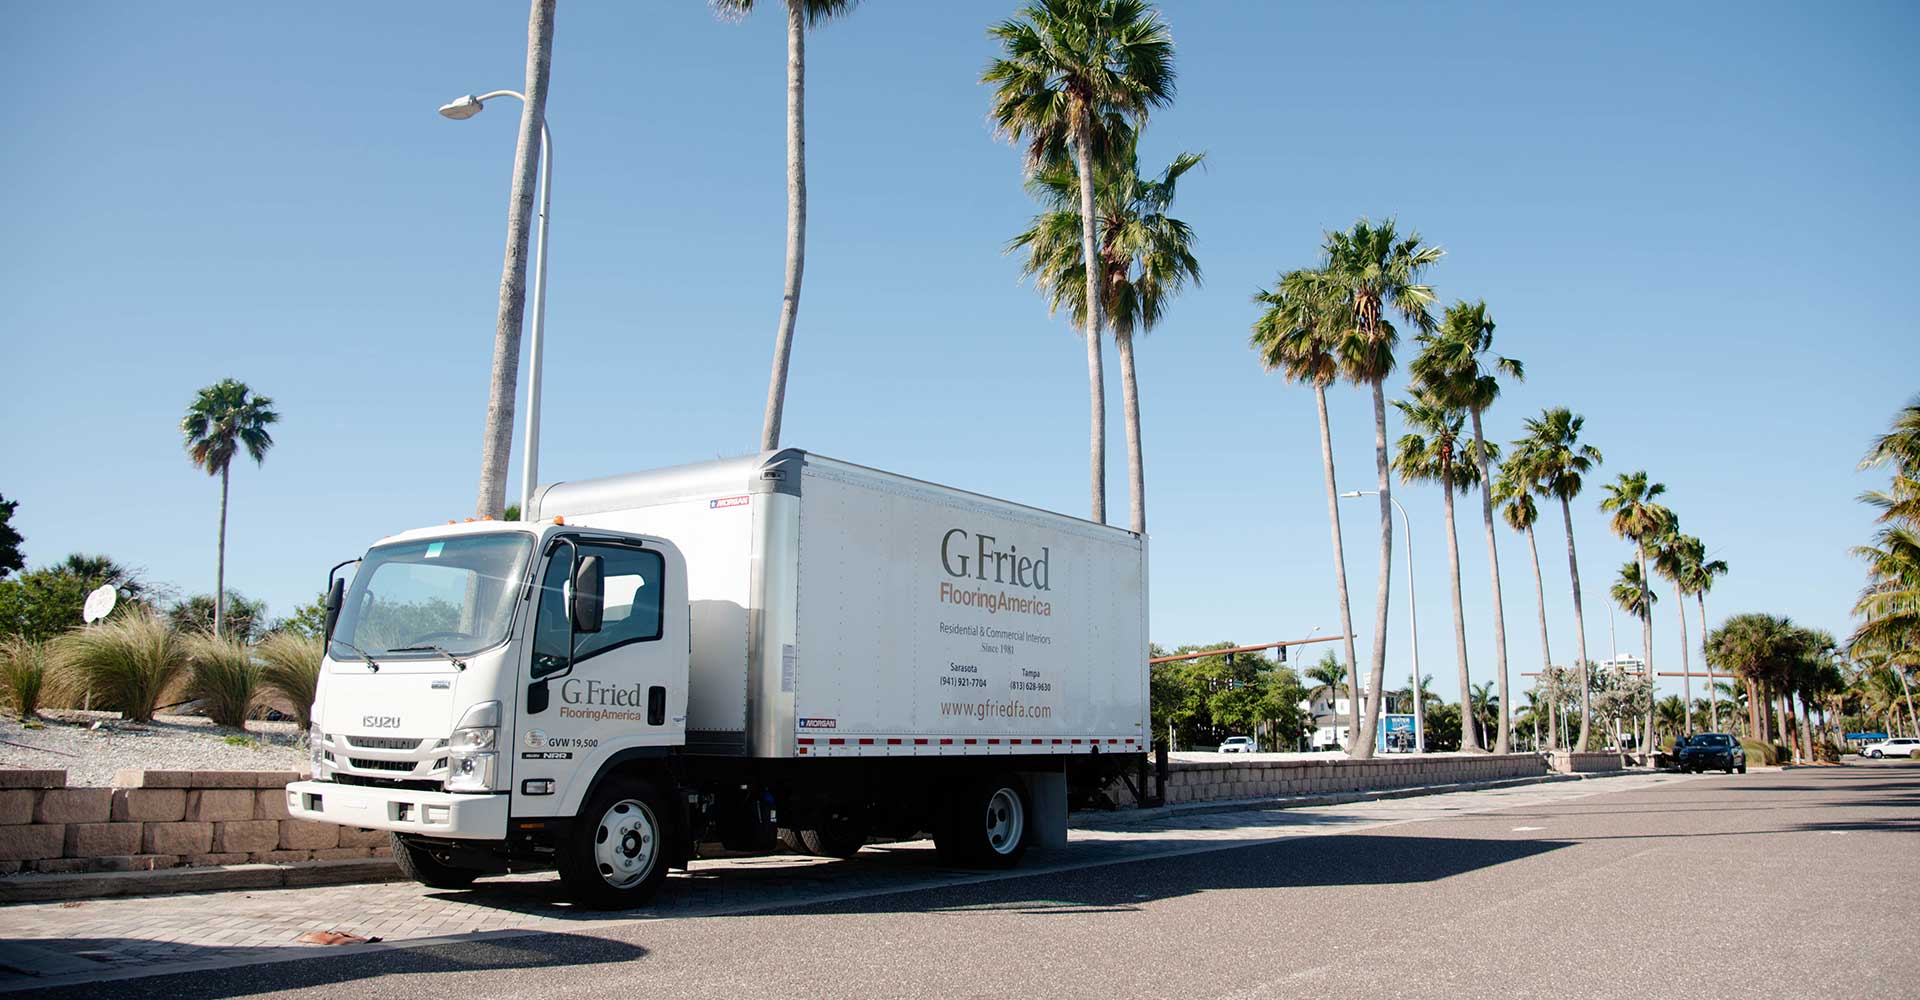 G. Fried truck parked below palm trees